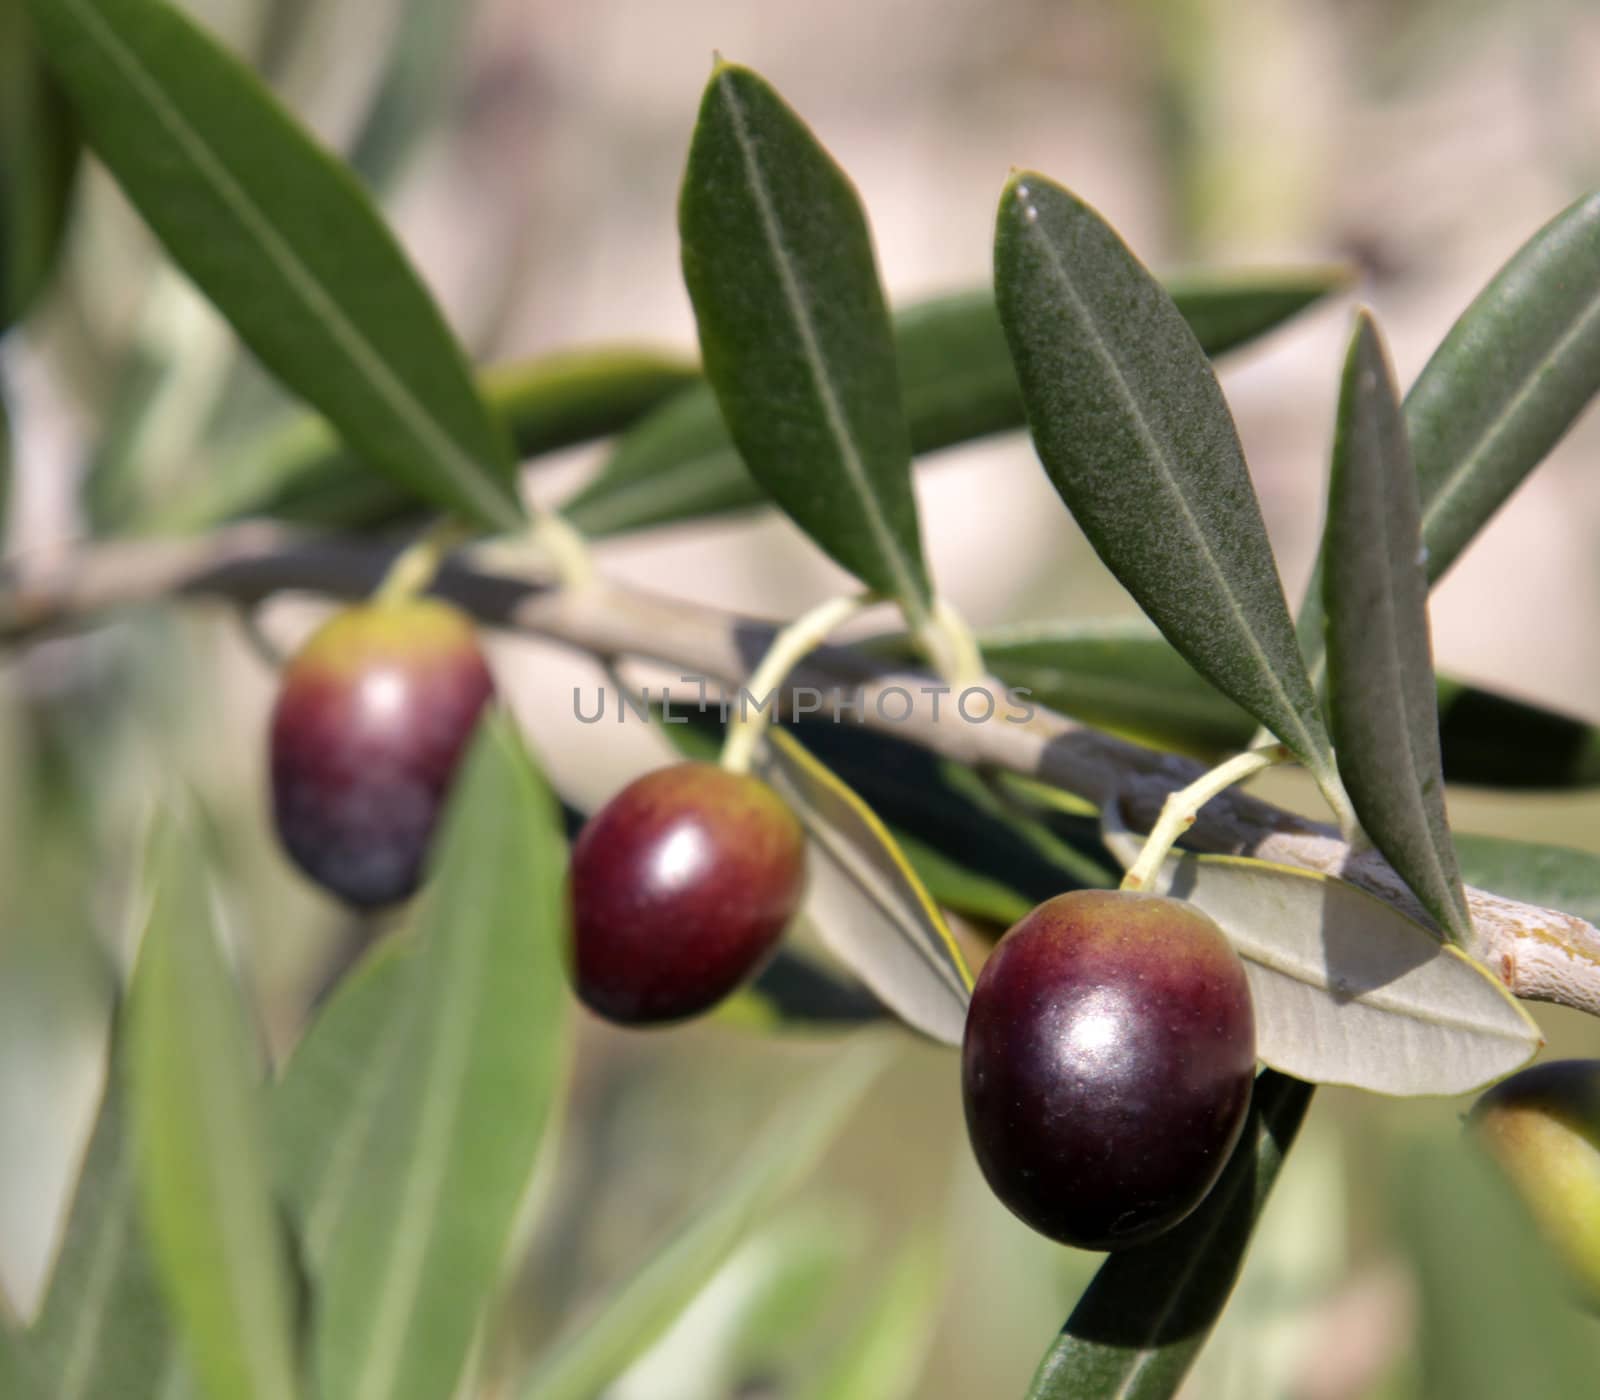 Olives still on the branch of an Olive tree in Italy.
